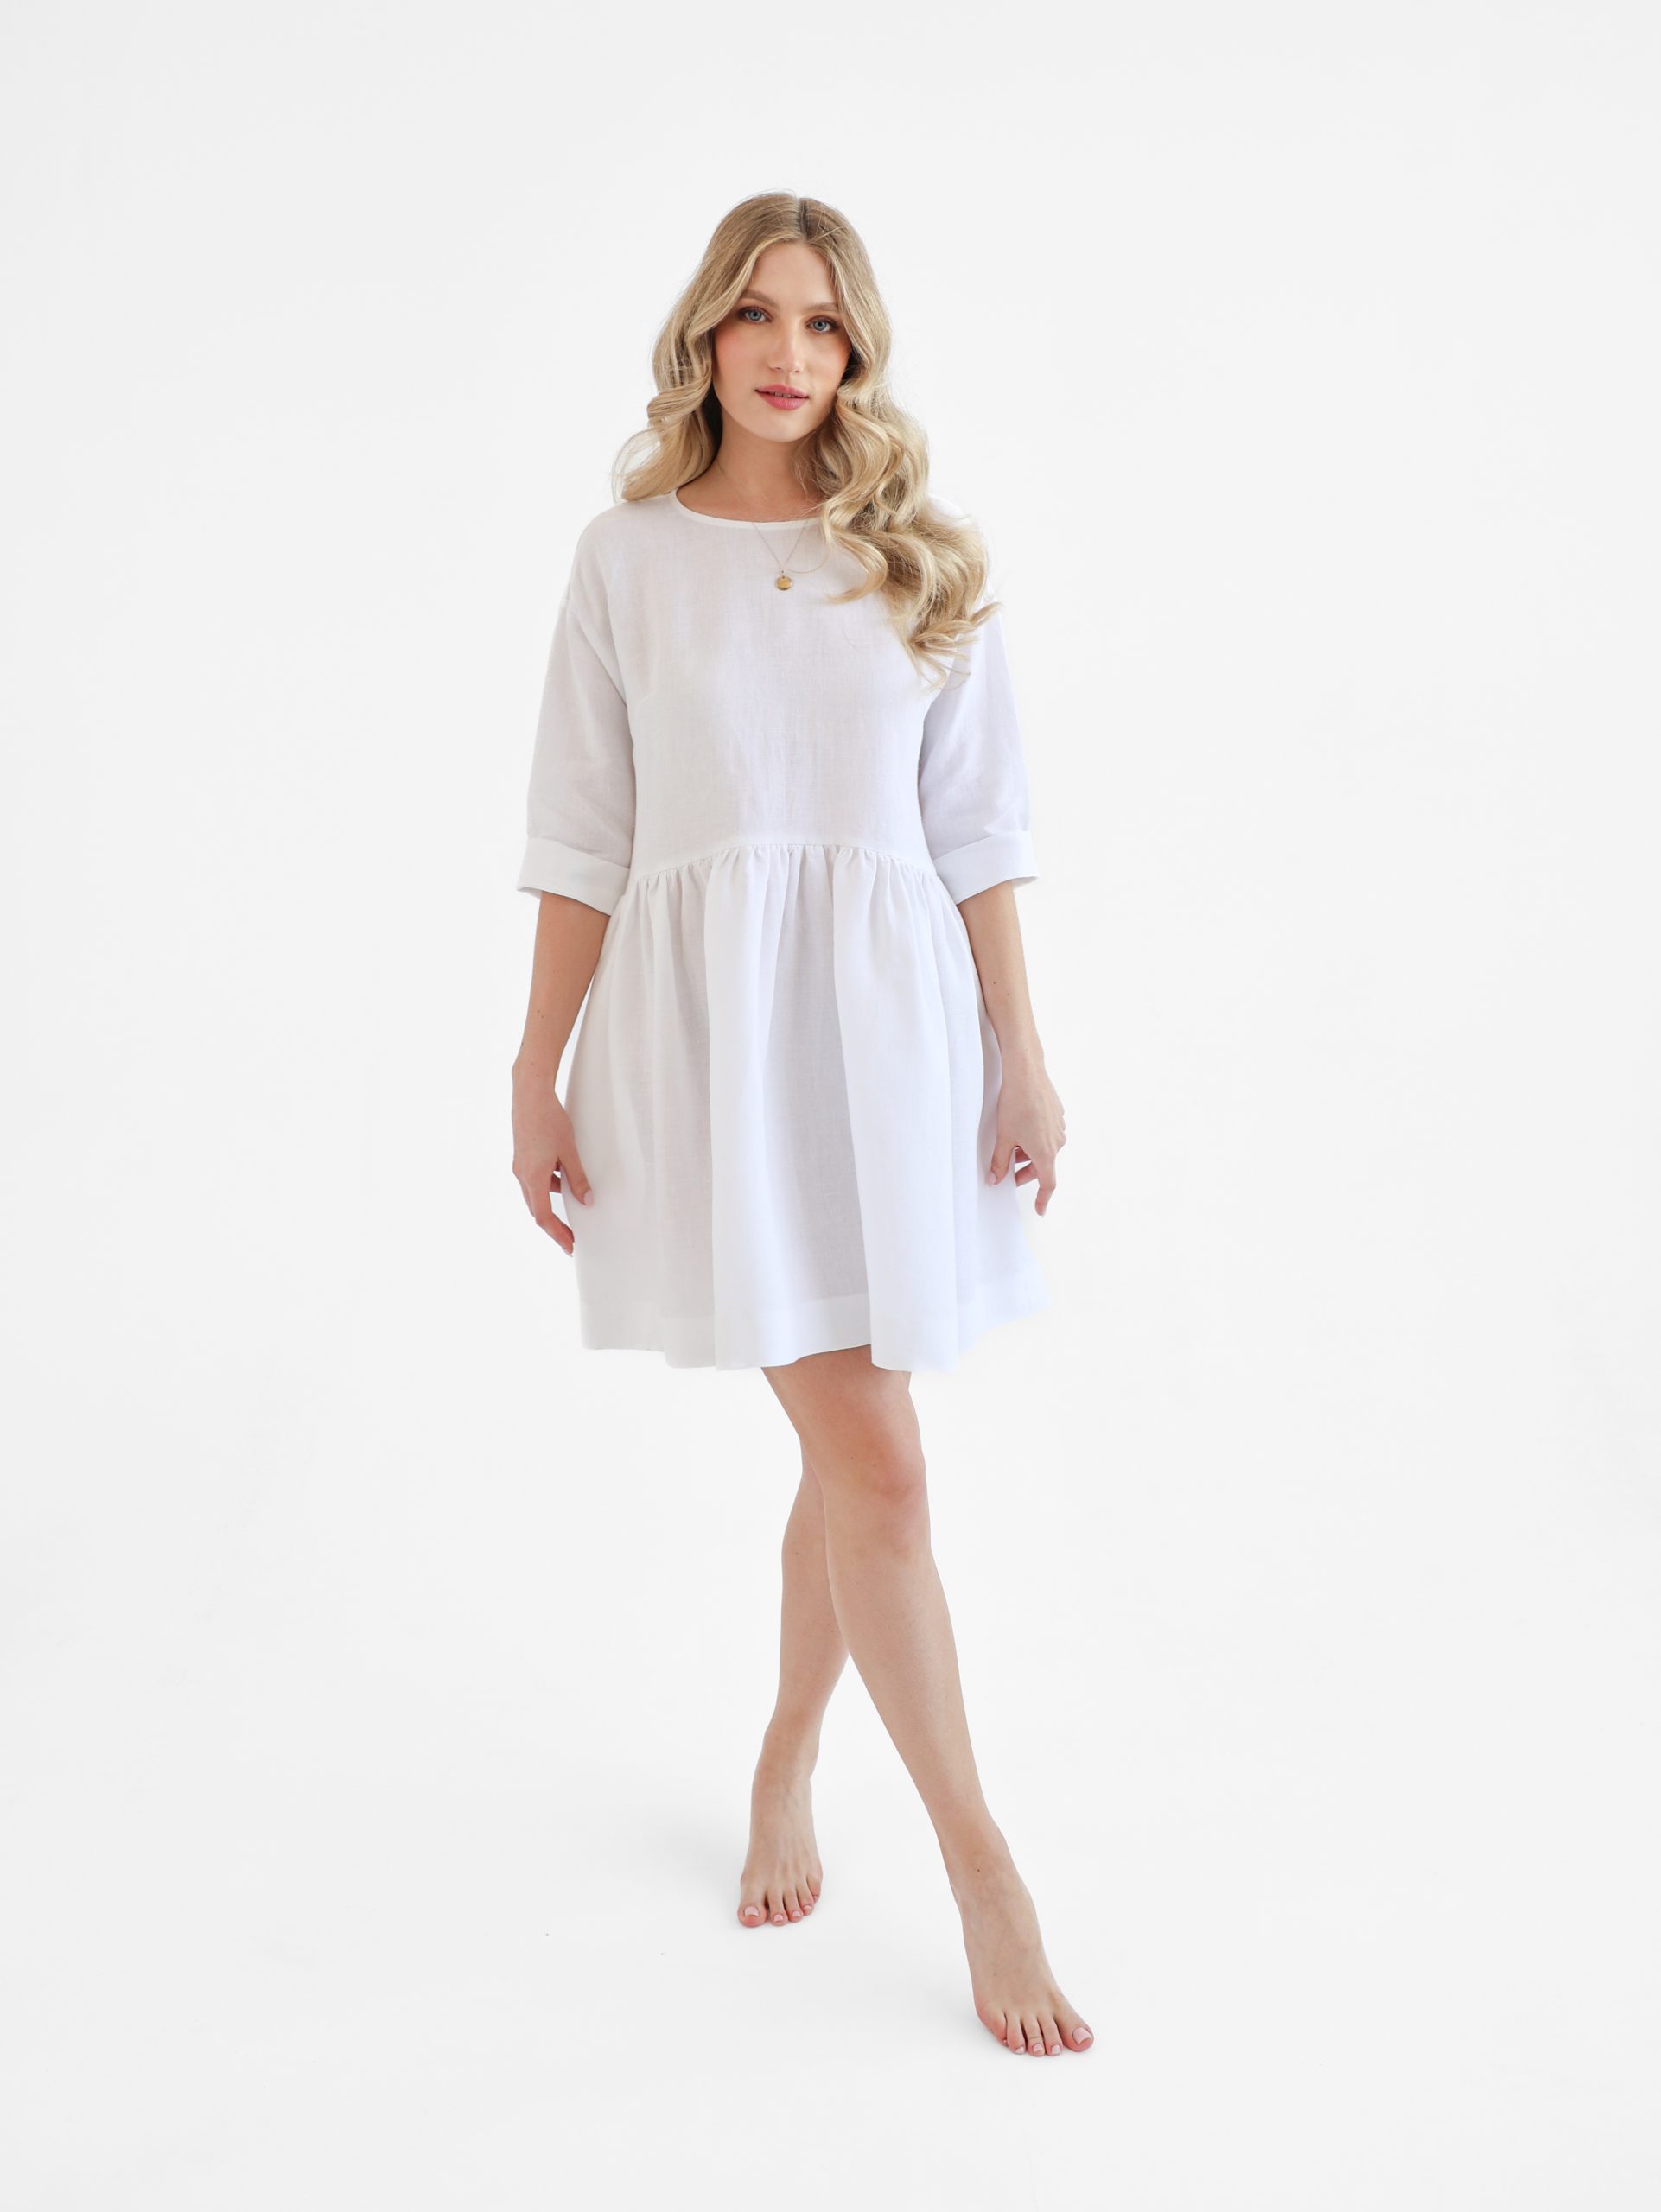 Linen dress for hot weather